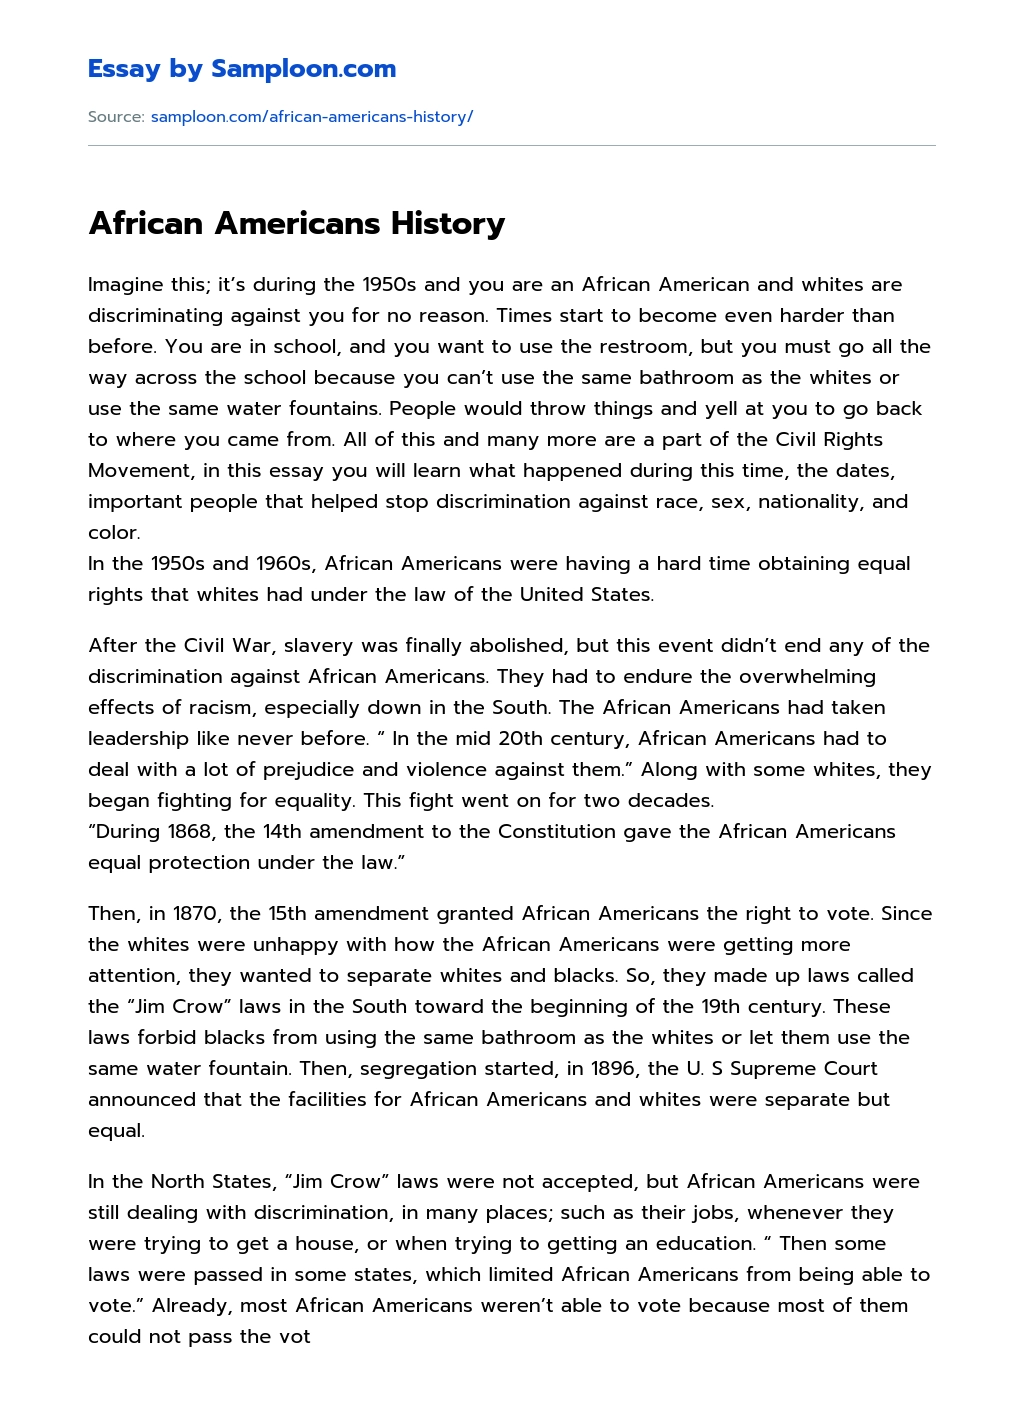 African Americans History essay